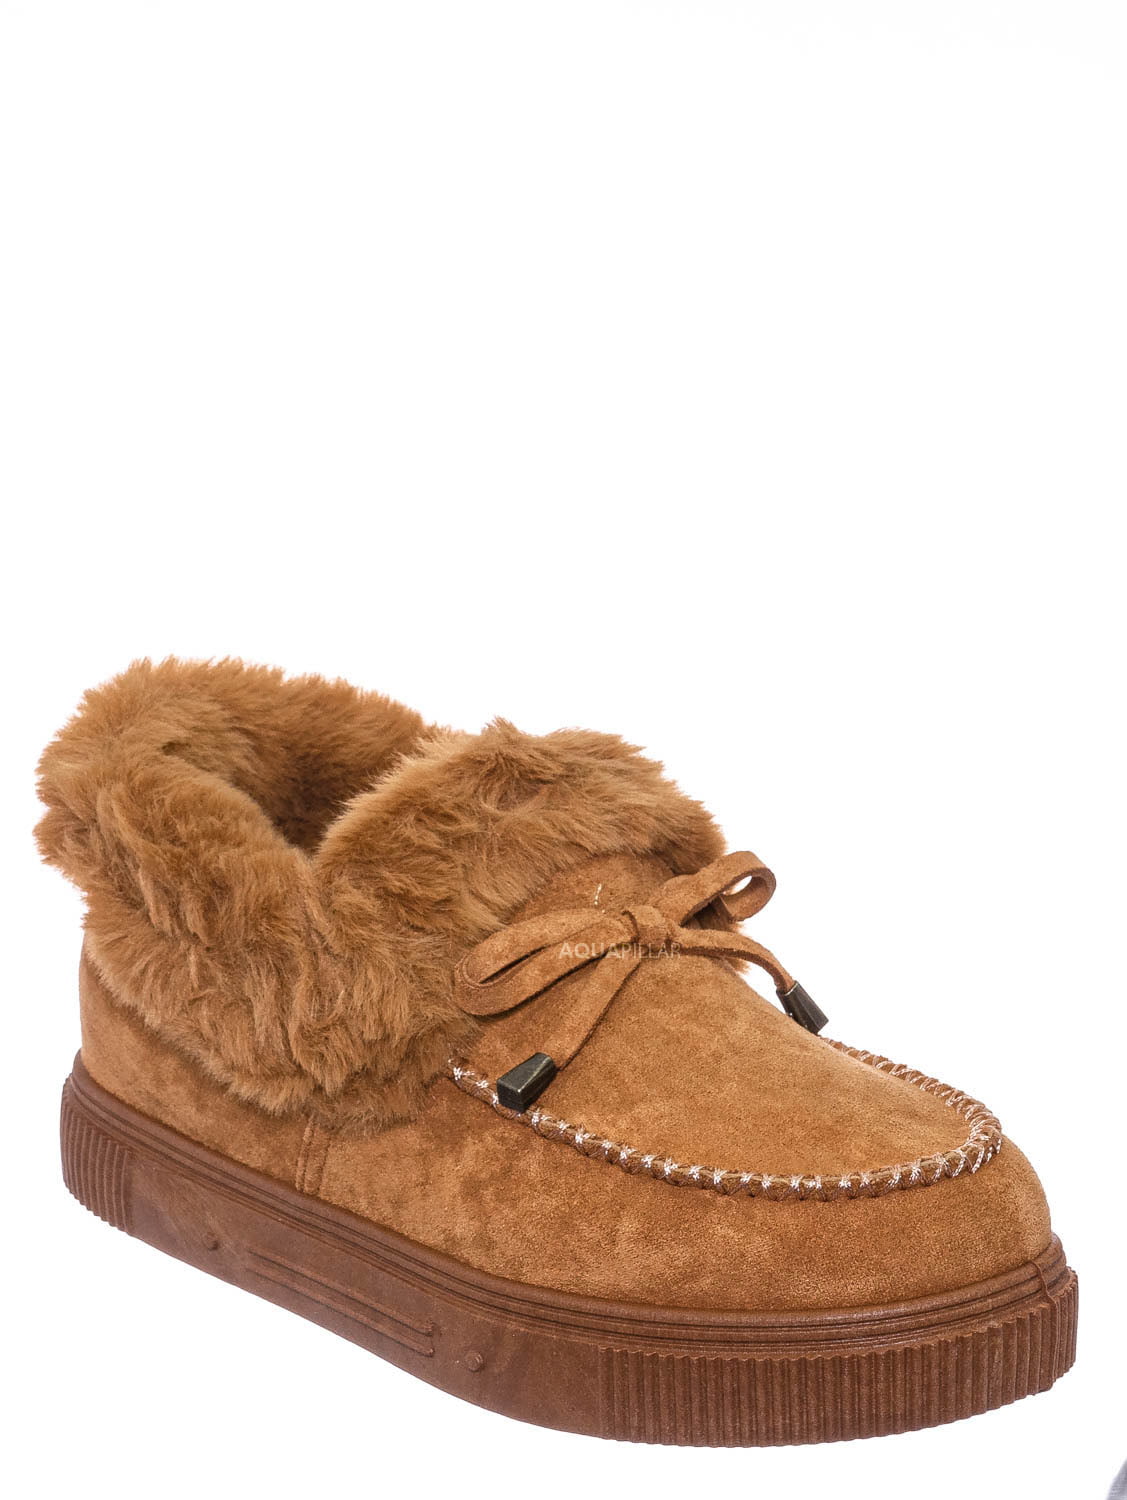 fuzzy moccasin boots